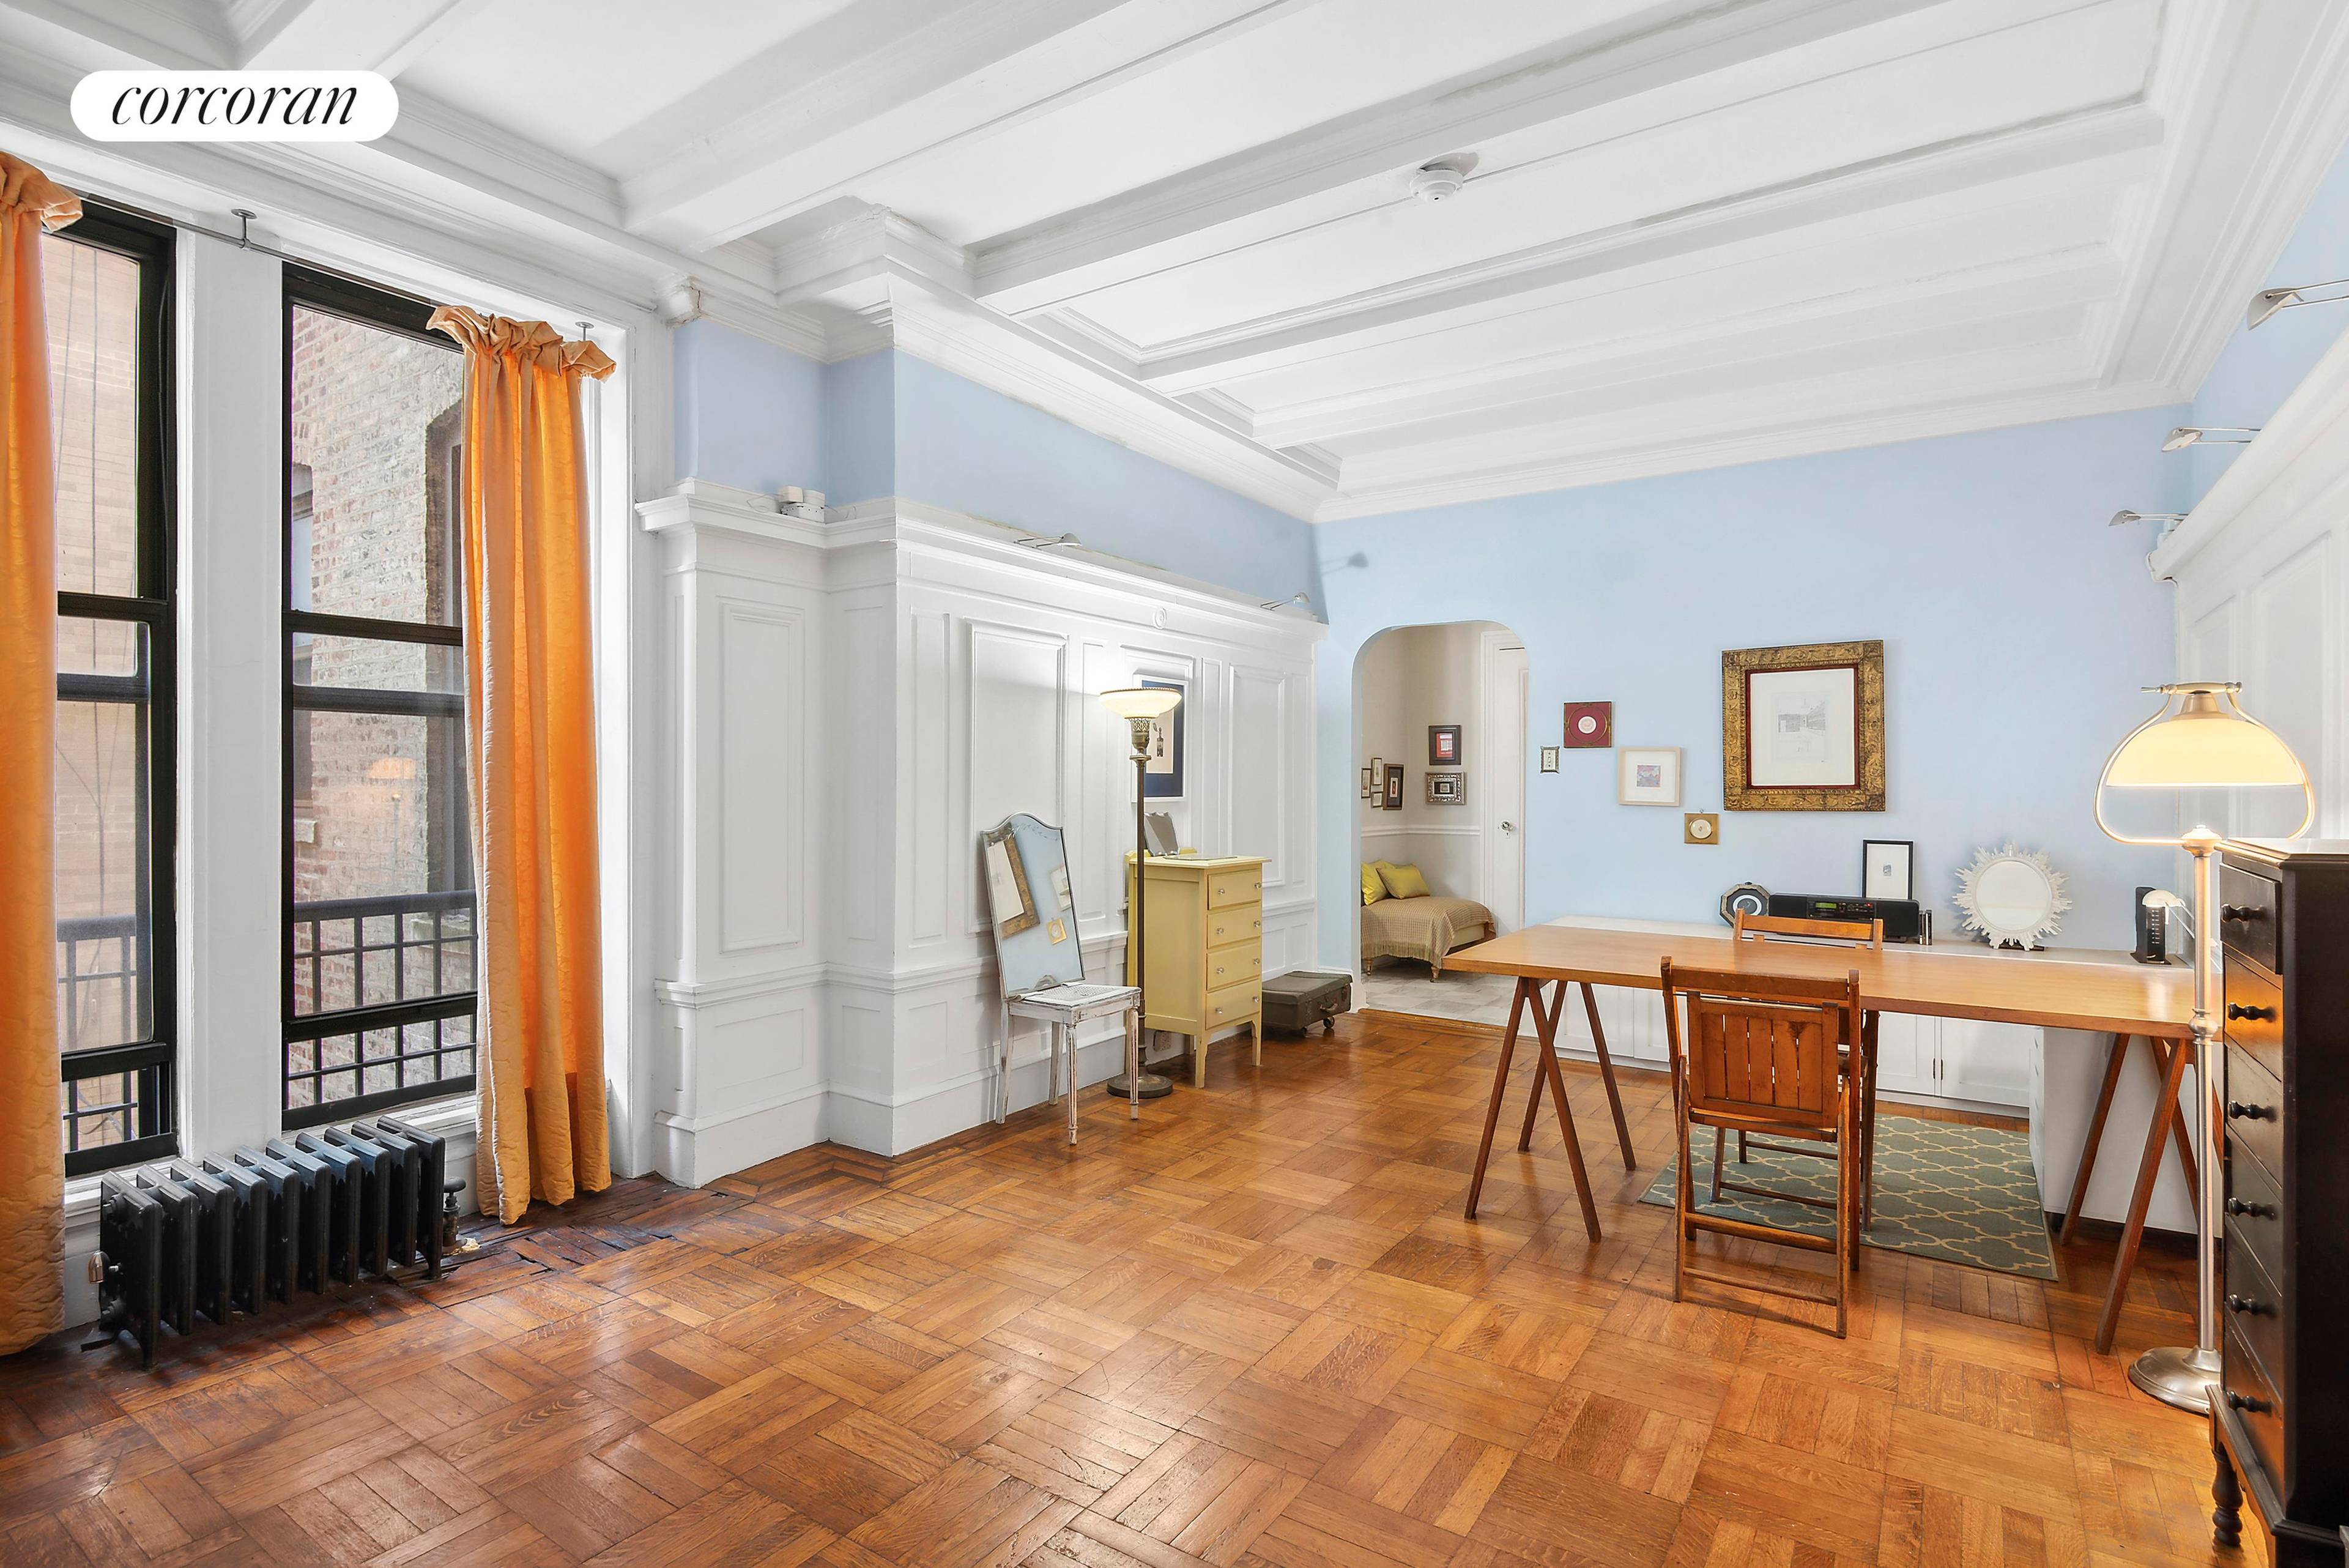 1 Bedroom Apartment in The Hamilton, 420 Riverside Drive, Apt 2KExperience the charm of pre war living in this cozy 1 bedroom apartment at 420 Riverside Drive, Apt 2K.